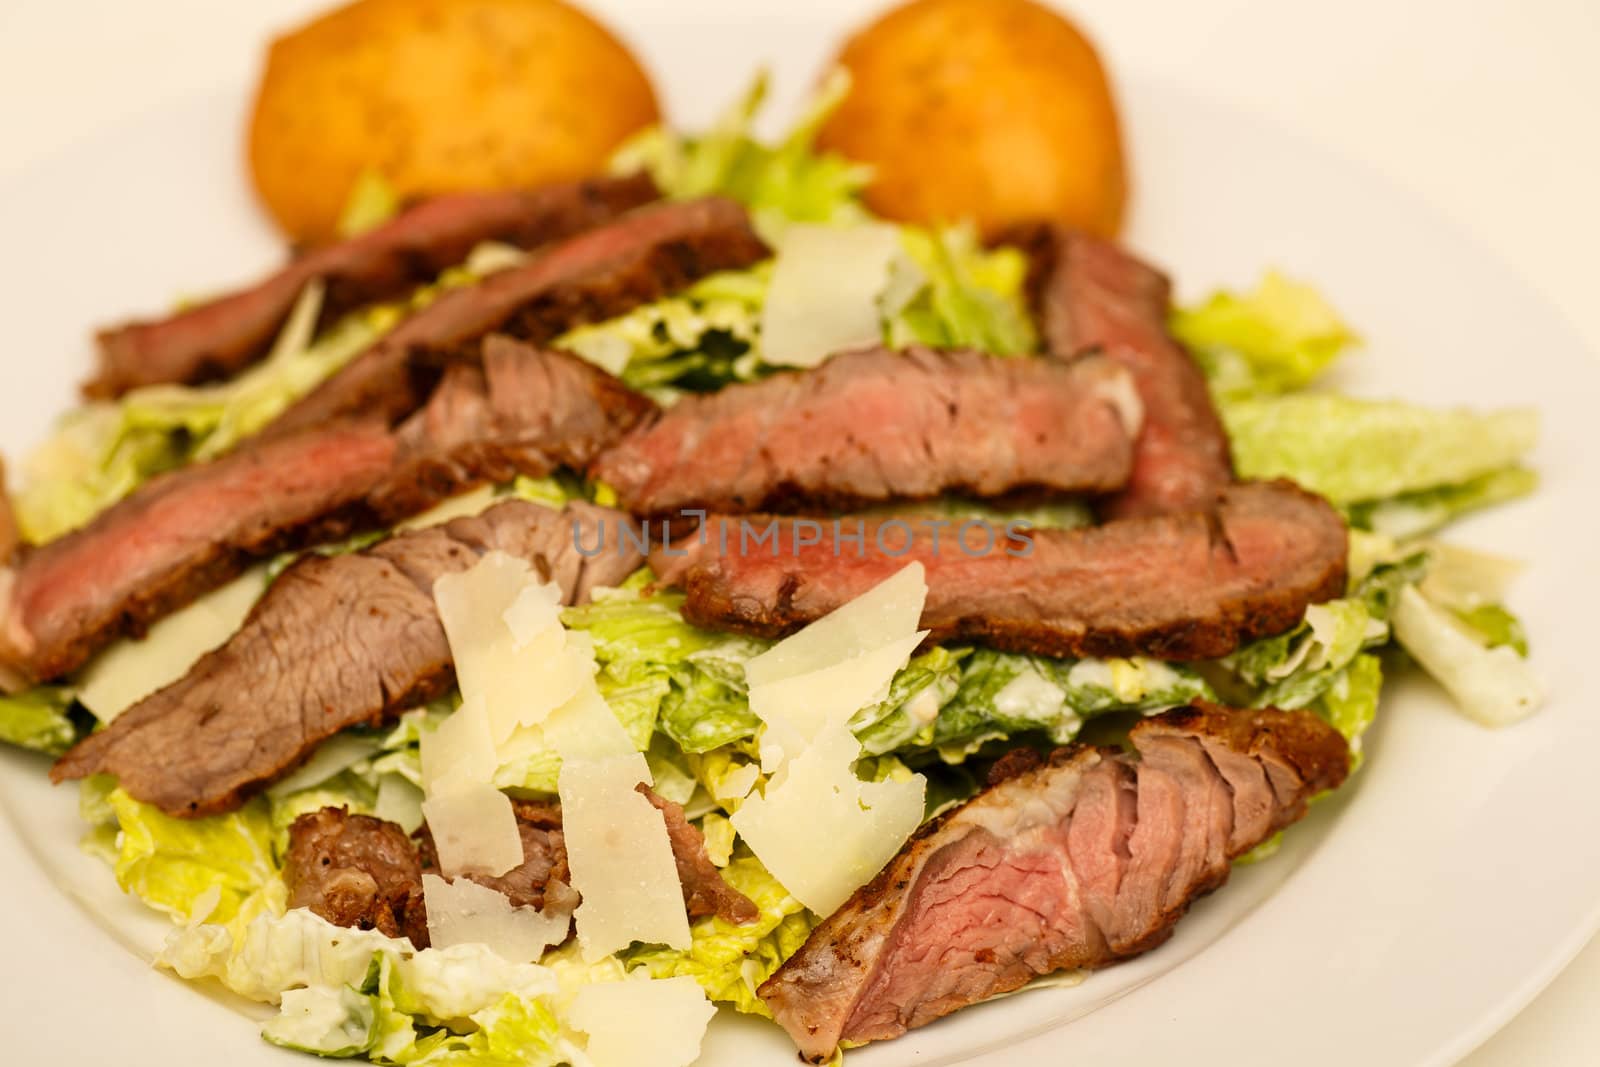 Caesar Salad with Beef Strips and Rolls by dbvirago